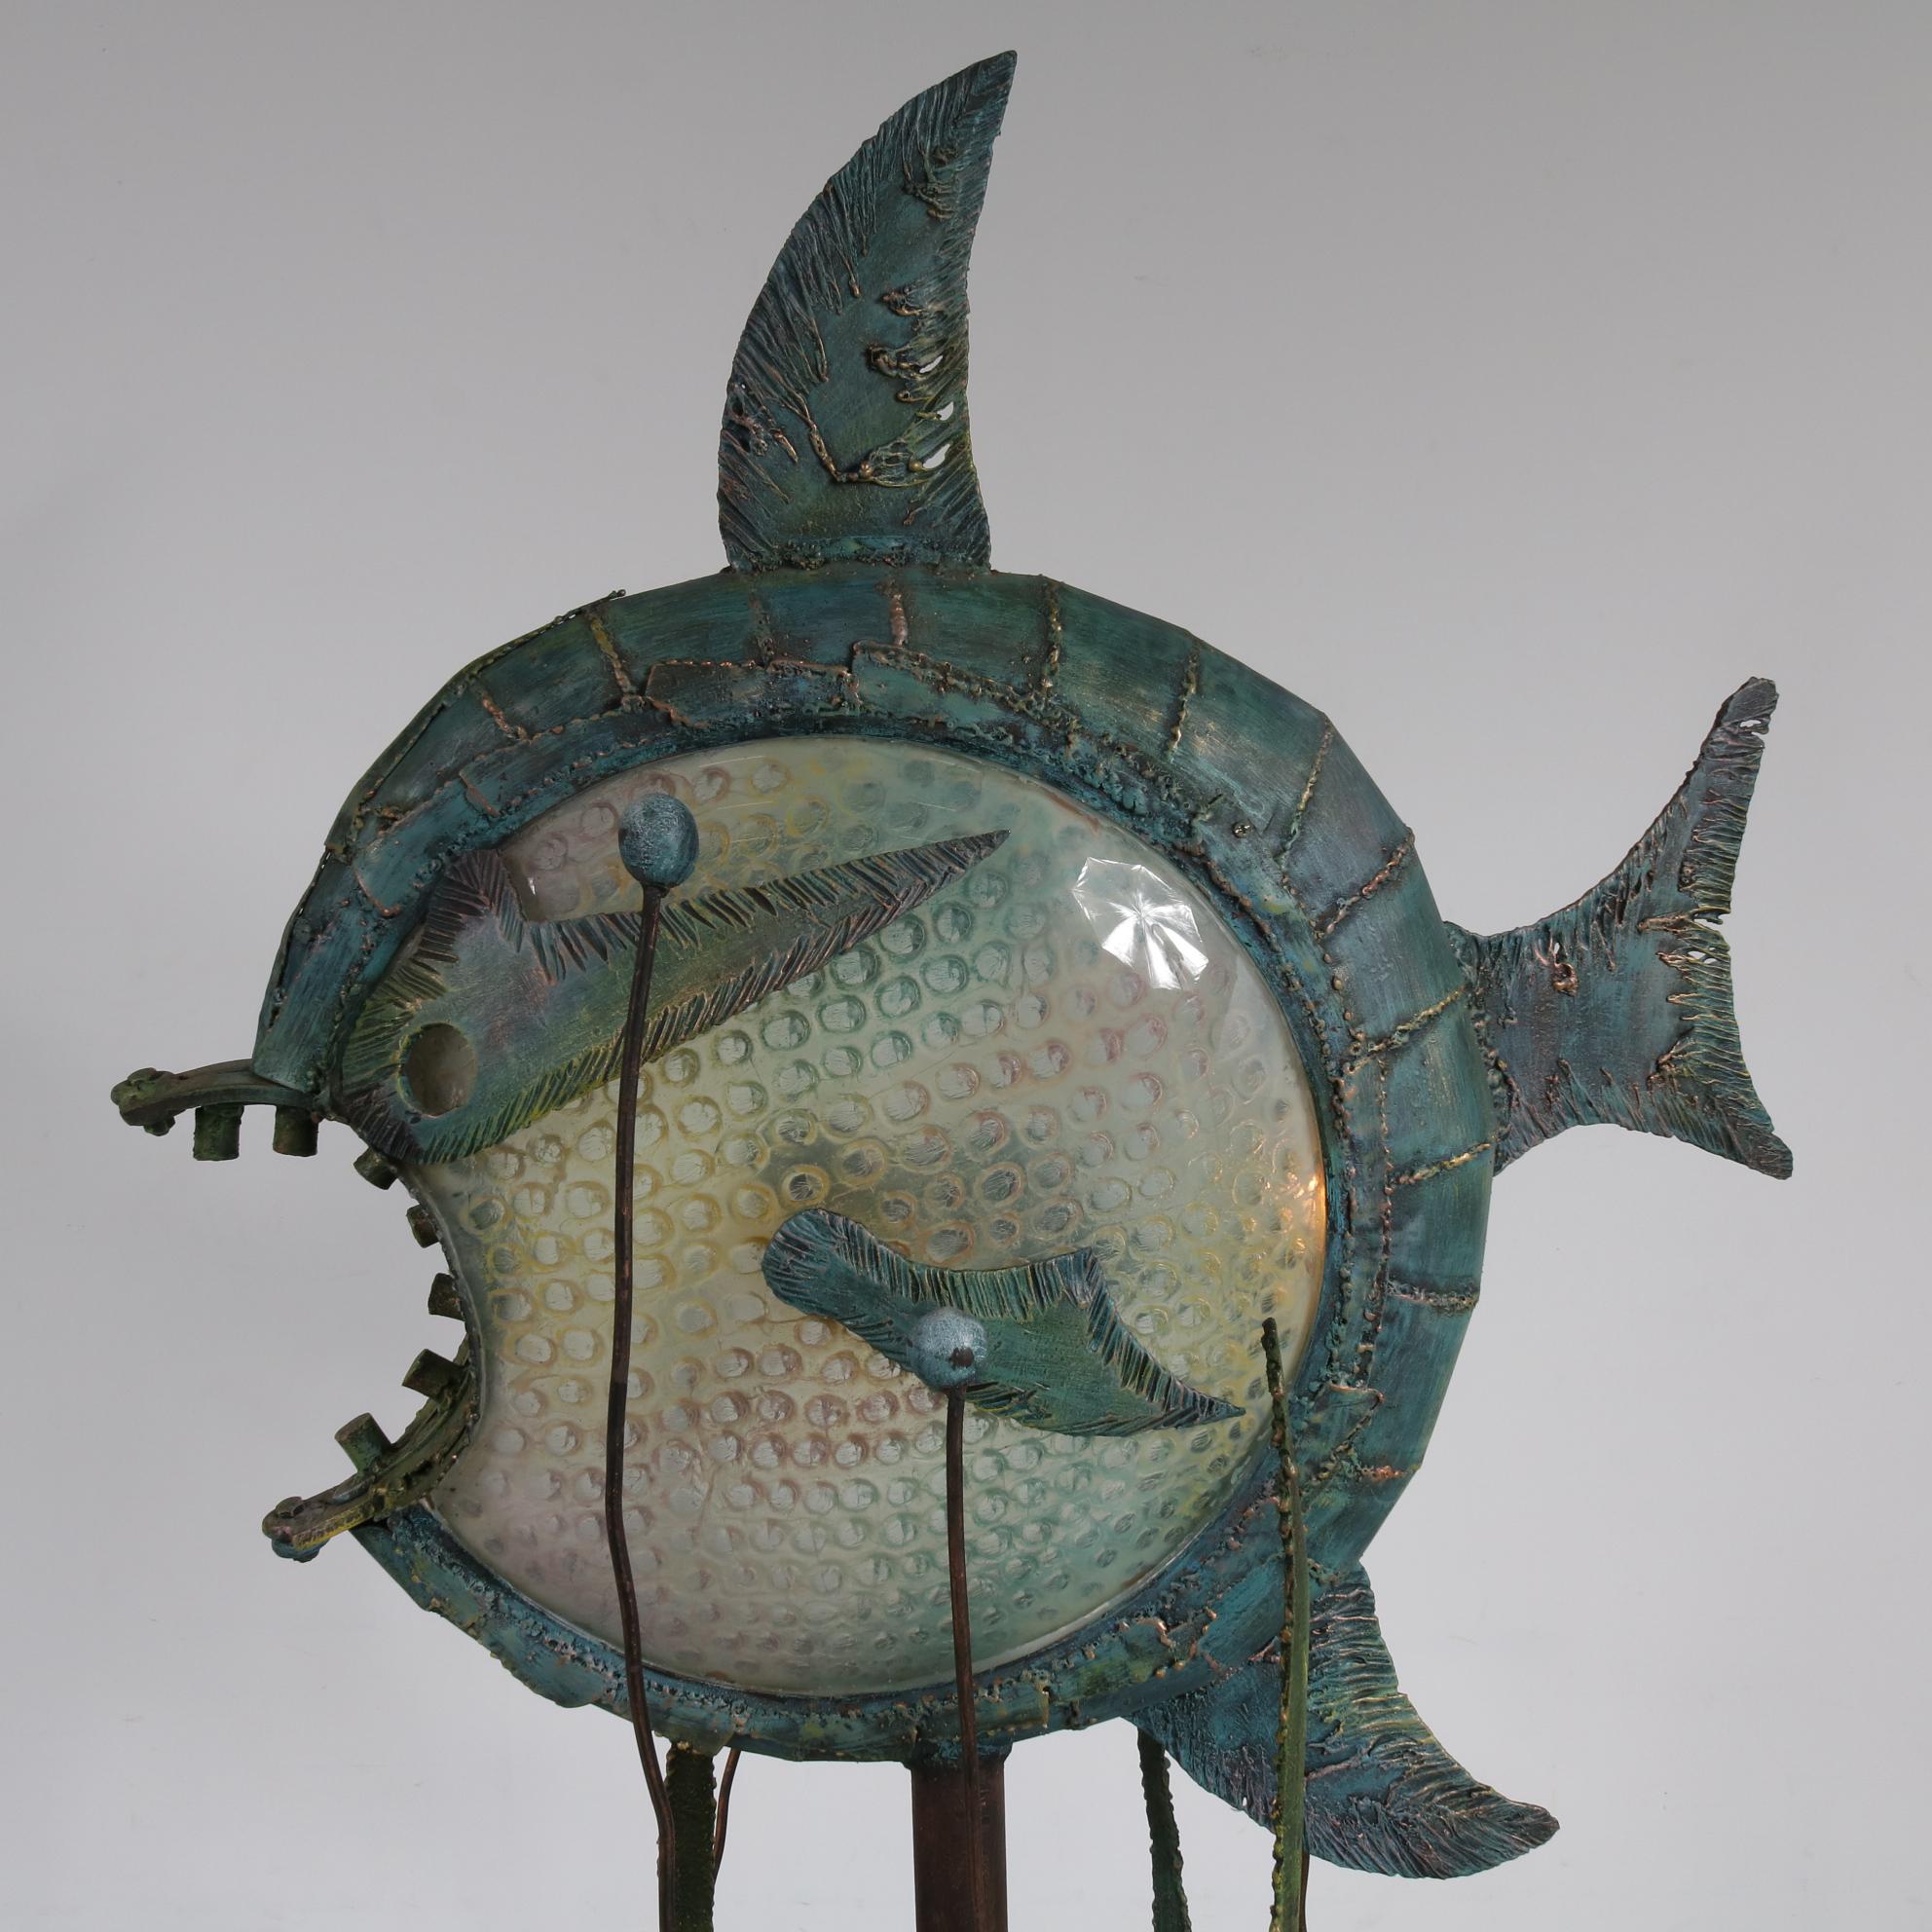 This impressive floor lamp in Brutalist style was produced in the Netherlands, circa 1960.

It is made of different shades of metal, copper and clear synthetics. It is shaped like a big fish, including metal kelps going up from the foot, which